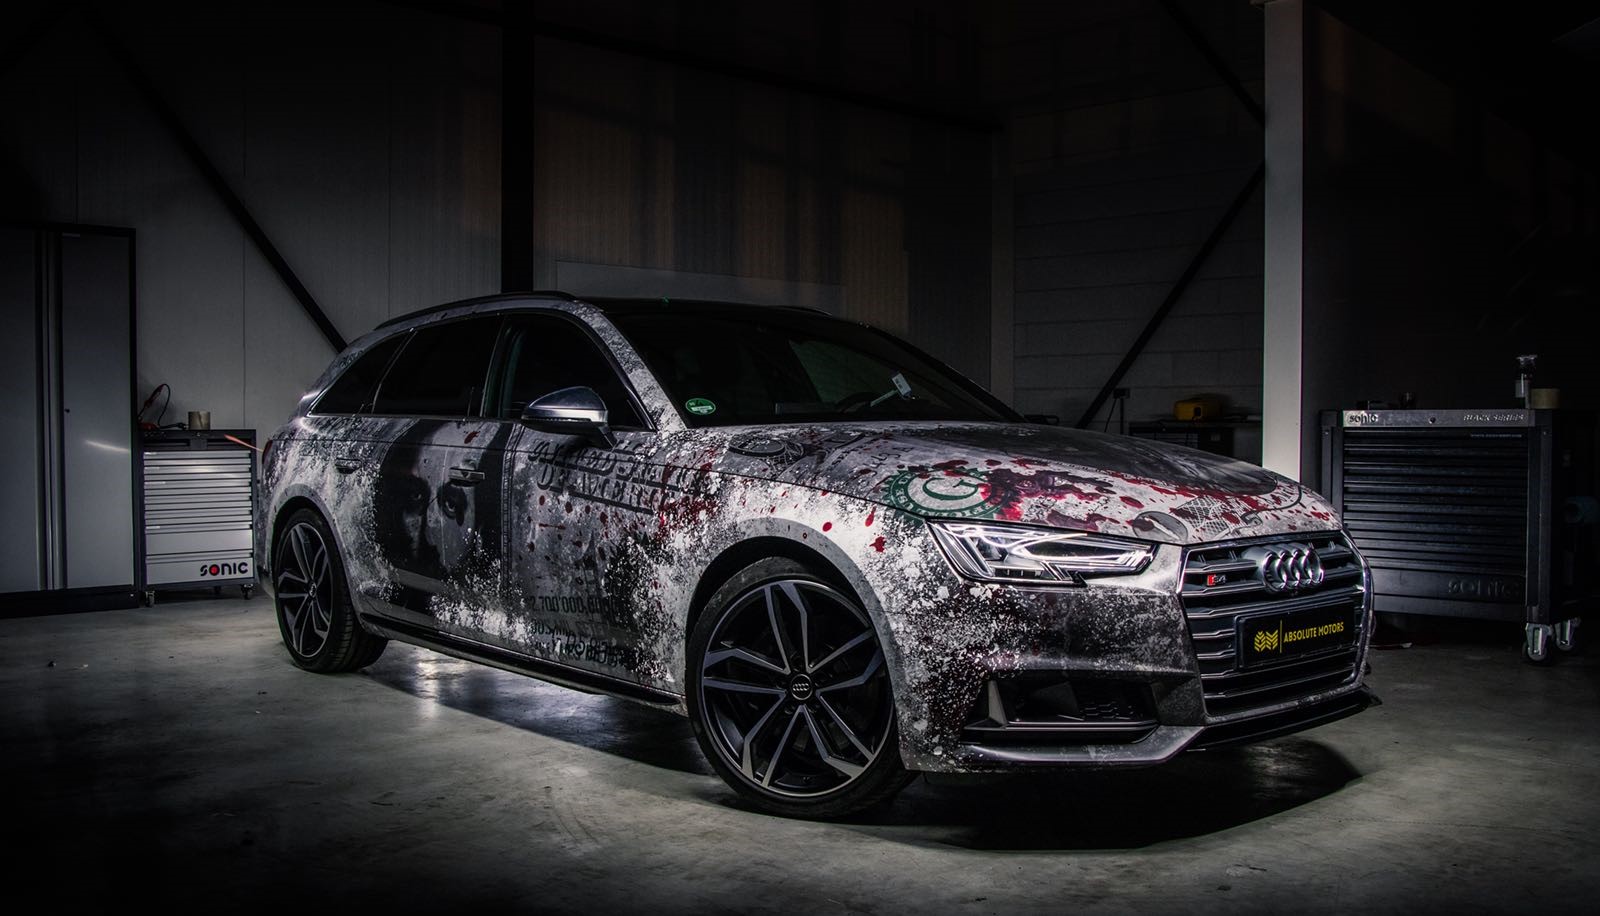 Objekt Reclame - Carwrapping Audi